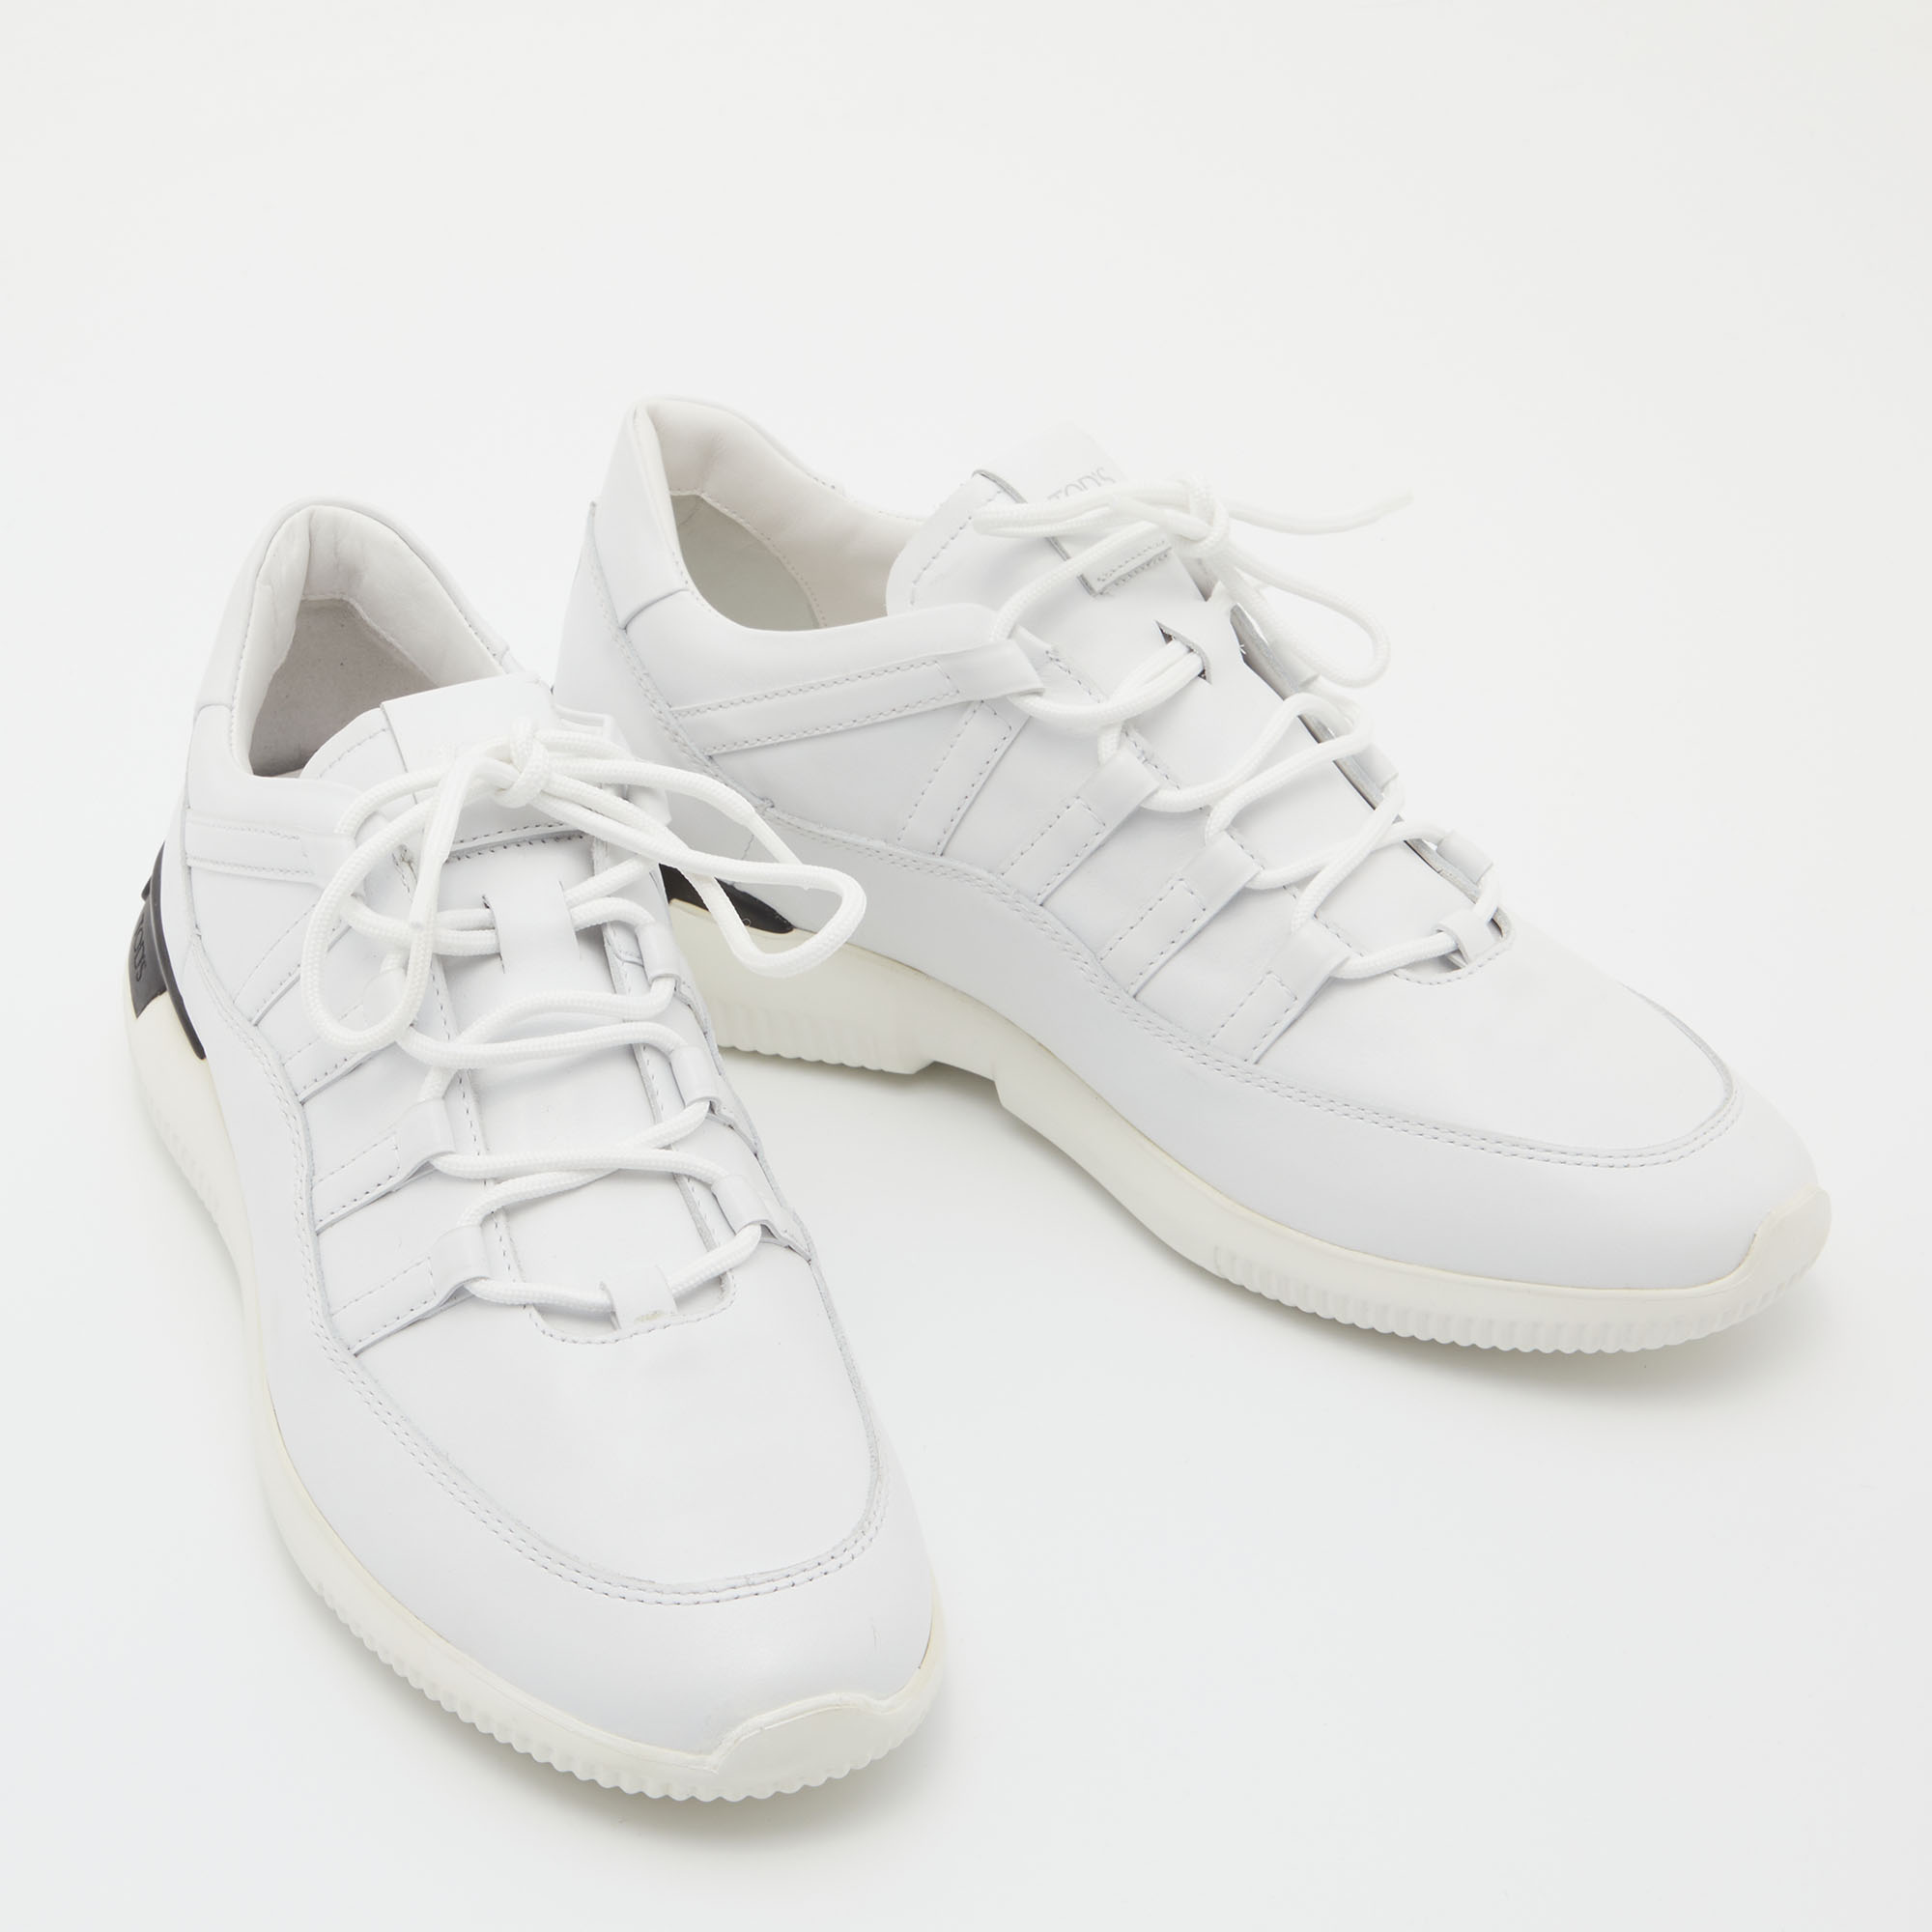 Tod's White Leather Low Top Sneakers Size 39.5